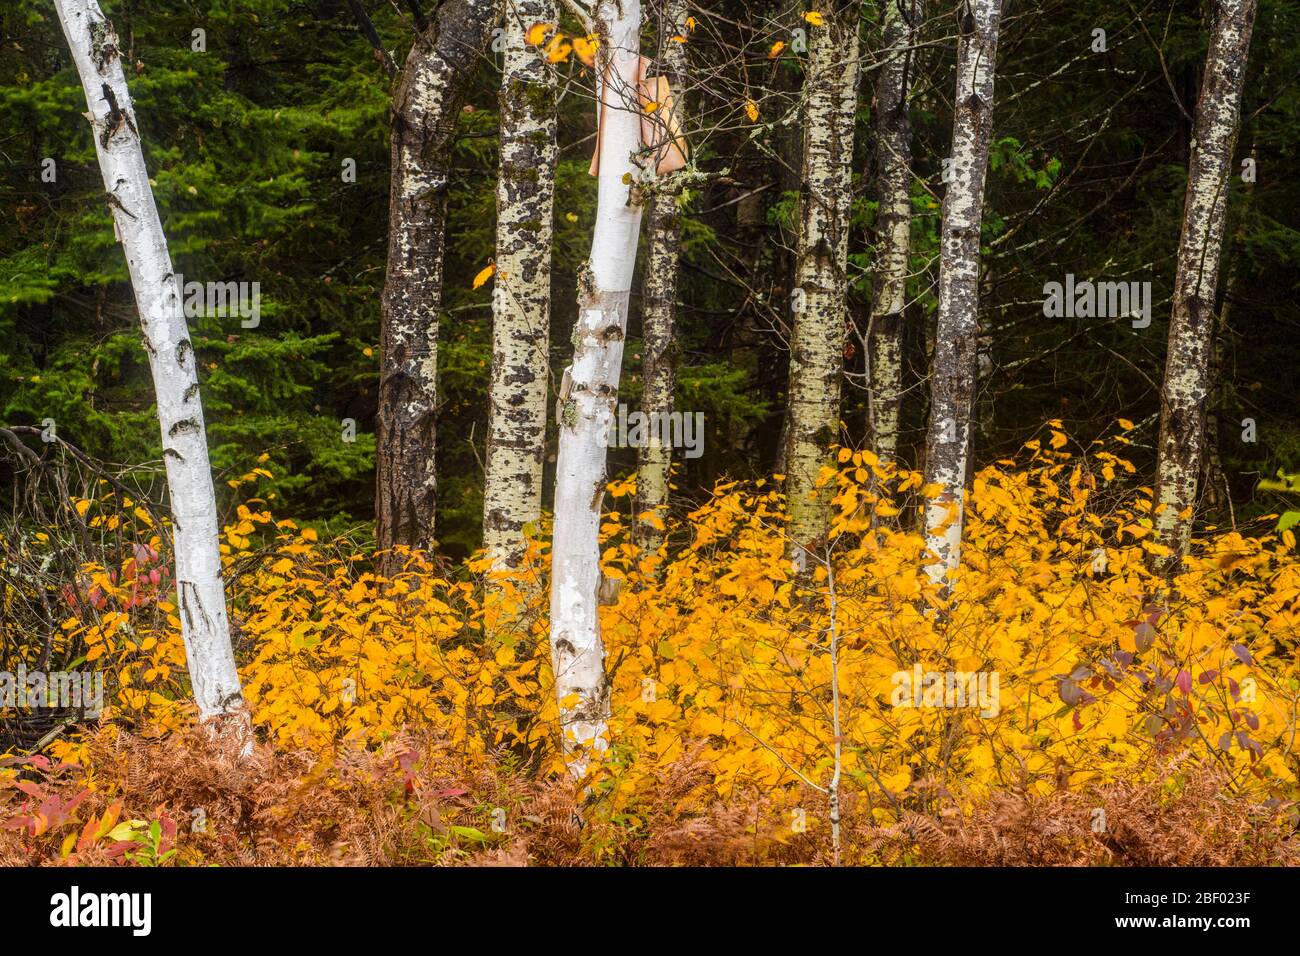 Aspen and birch tree trunks with autumn shrubs in the understory, Greater Sudbury, Ontario, Canada Stock Photo